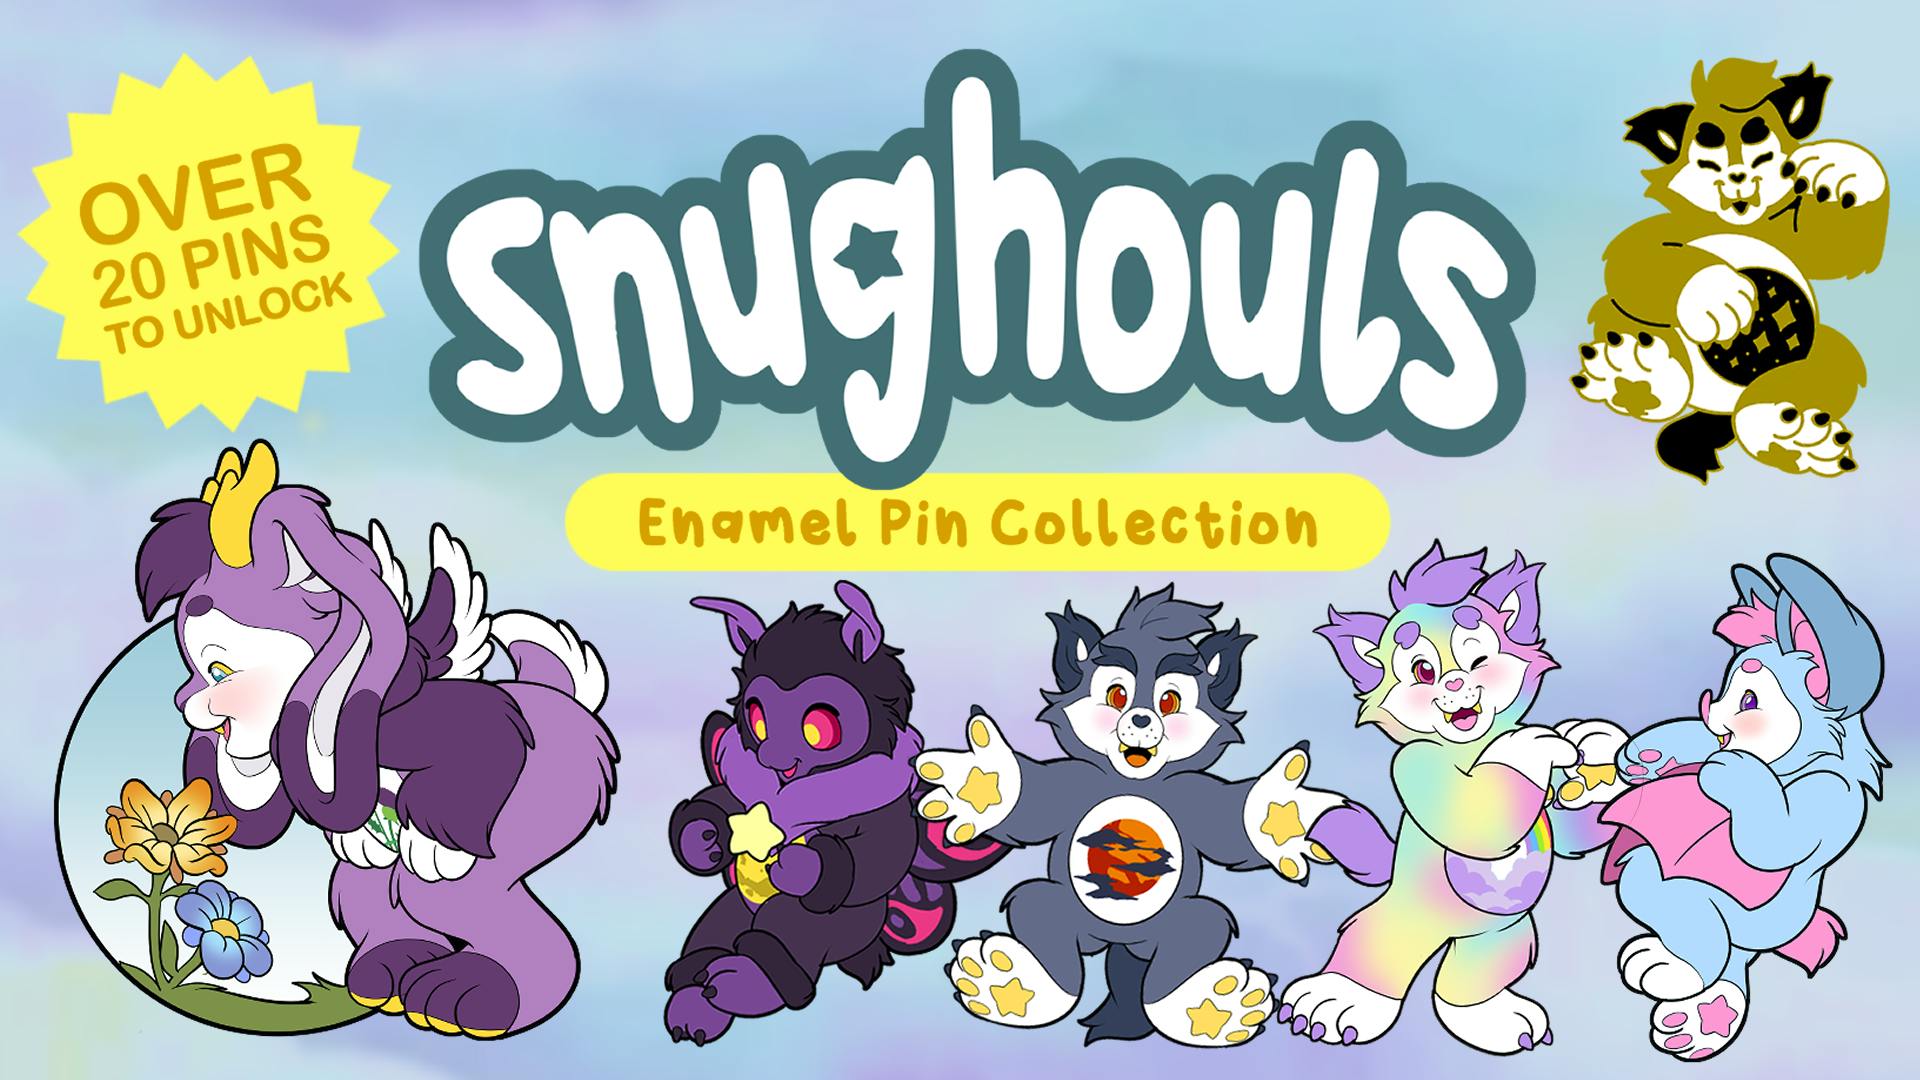 Snughouls: Enamel Pin Collection